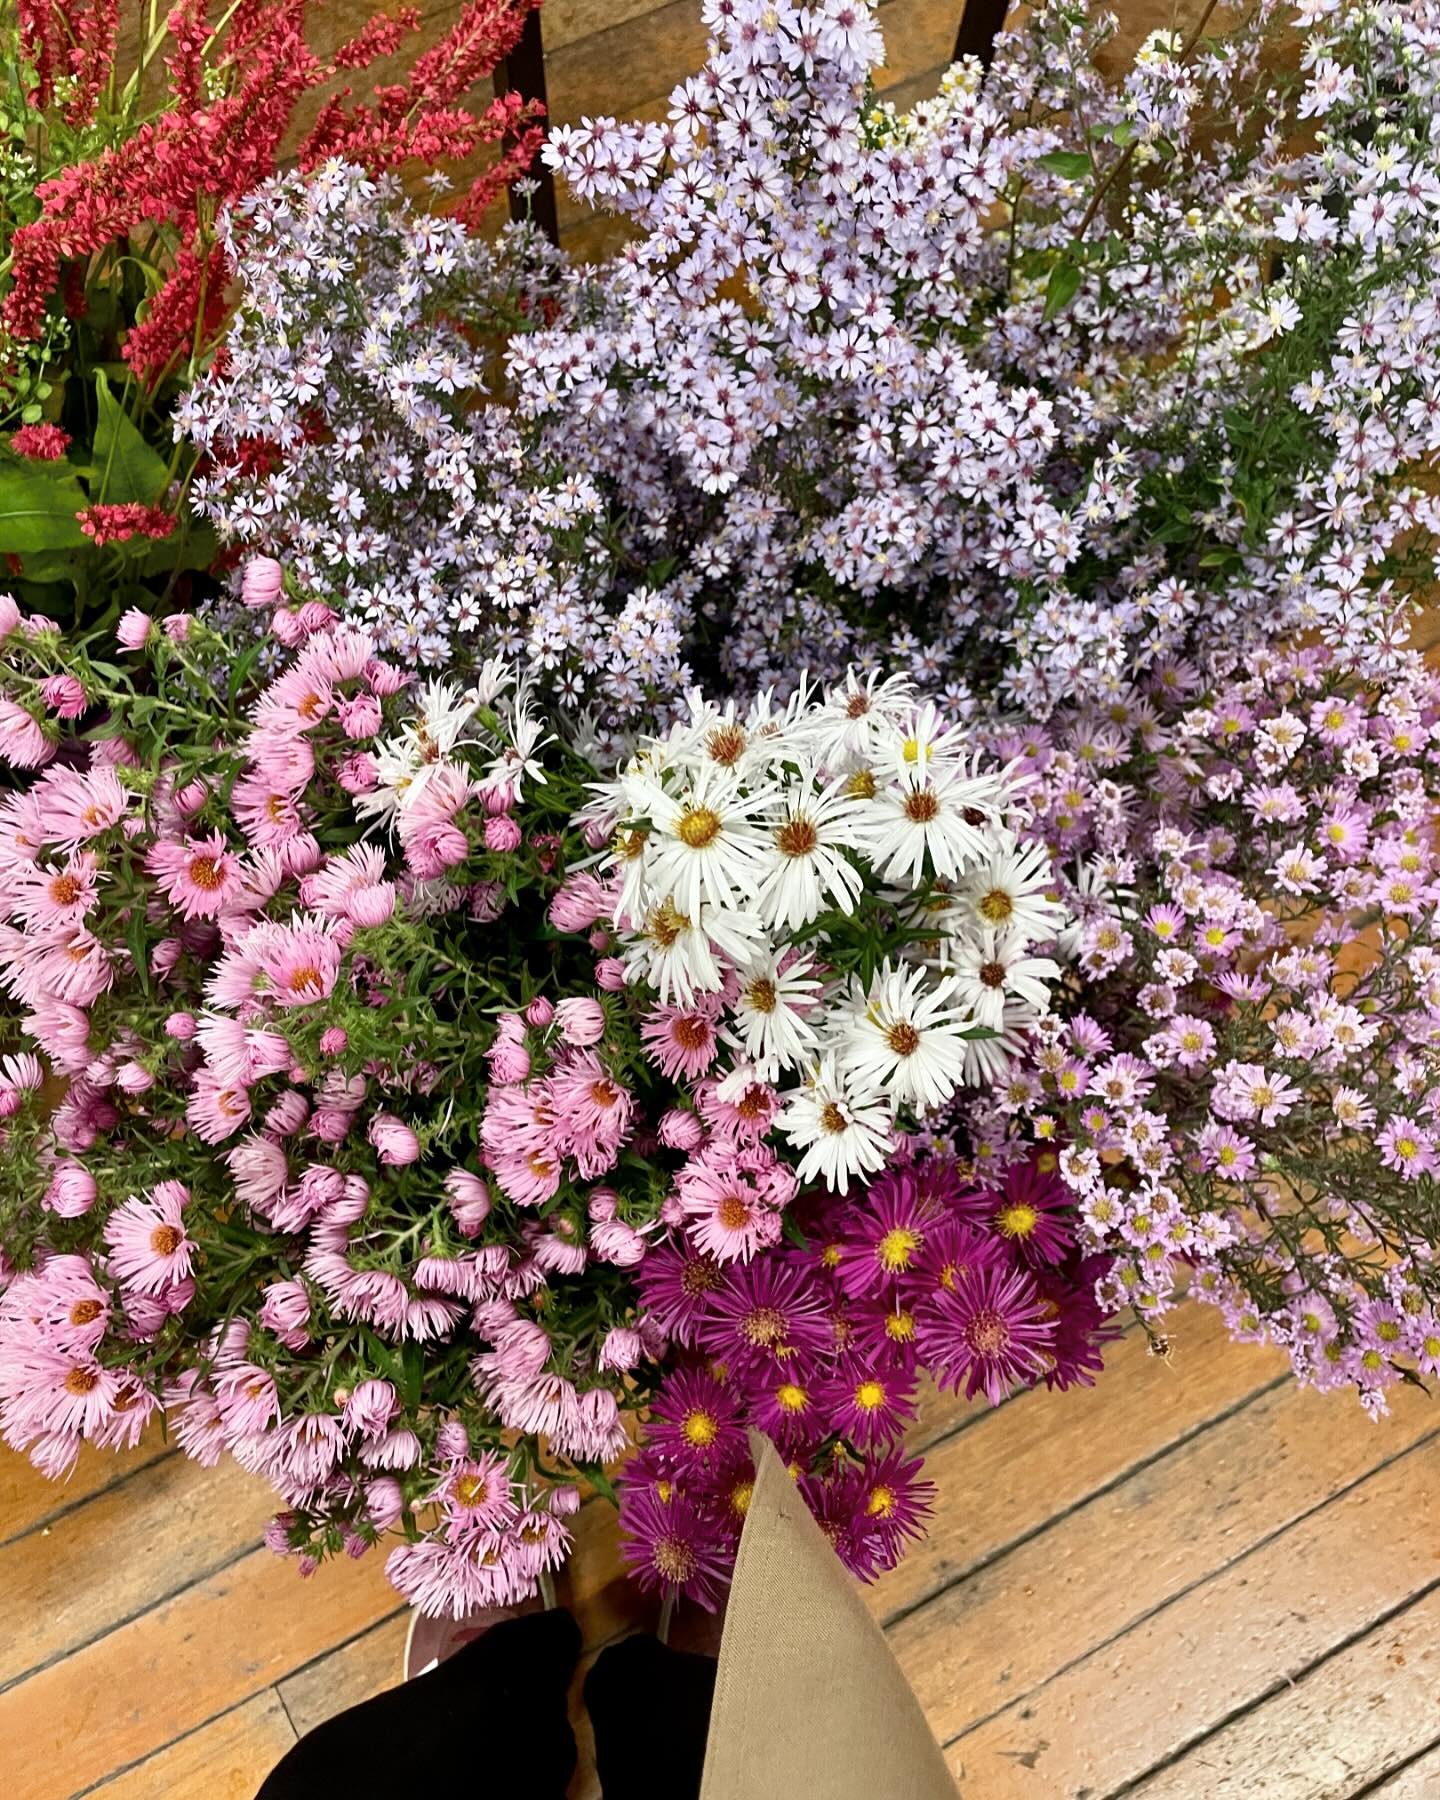 MOTHER&rsquo;S DAY 🩷 orders open for this week Monday - Saturday. Please spread them out as it&rsquo;s just me and I can only take so many orders per day. No Sunday delivery or pick up. Jack frost finished off my local growers flowers a few weeks ag